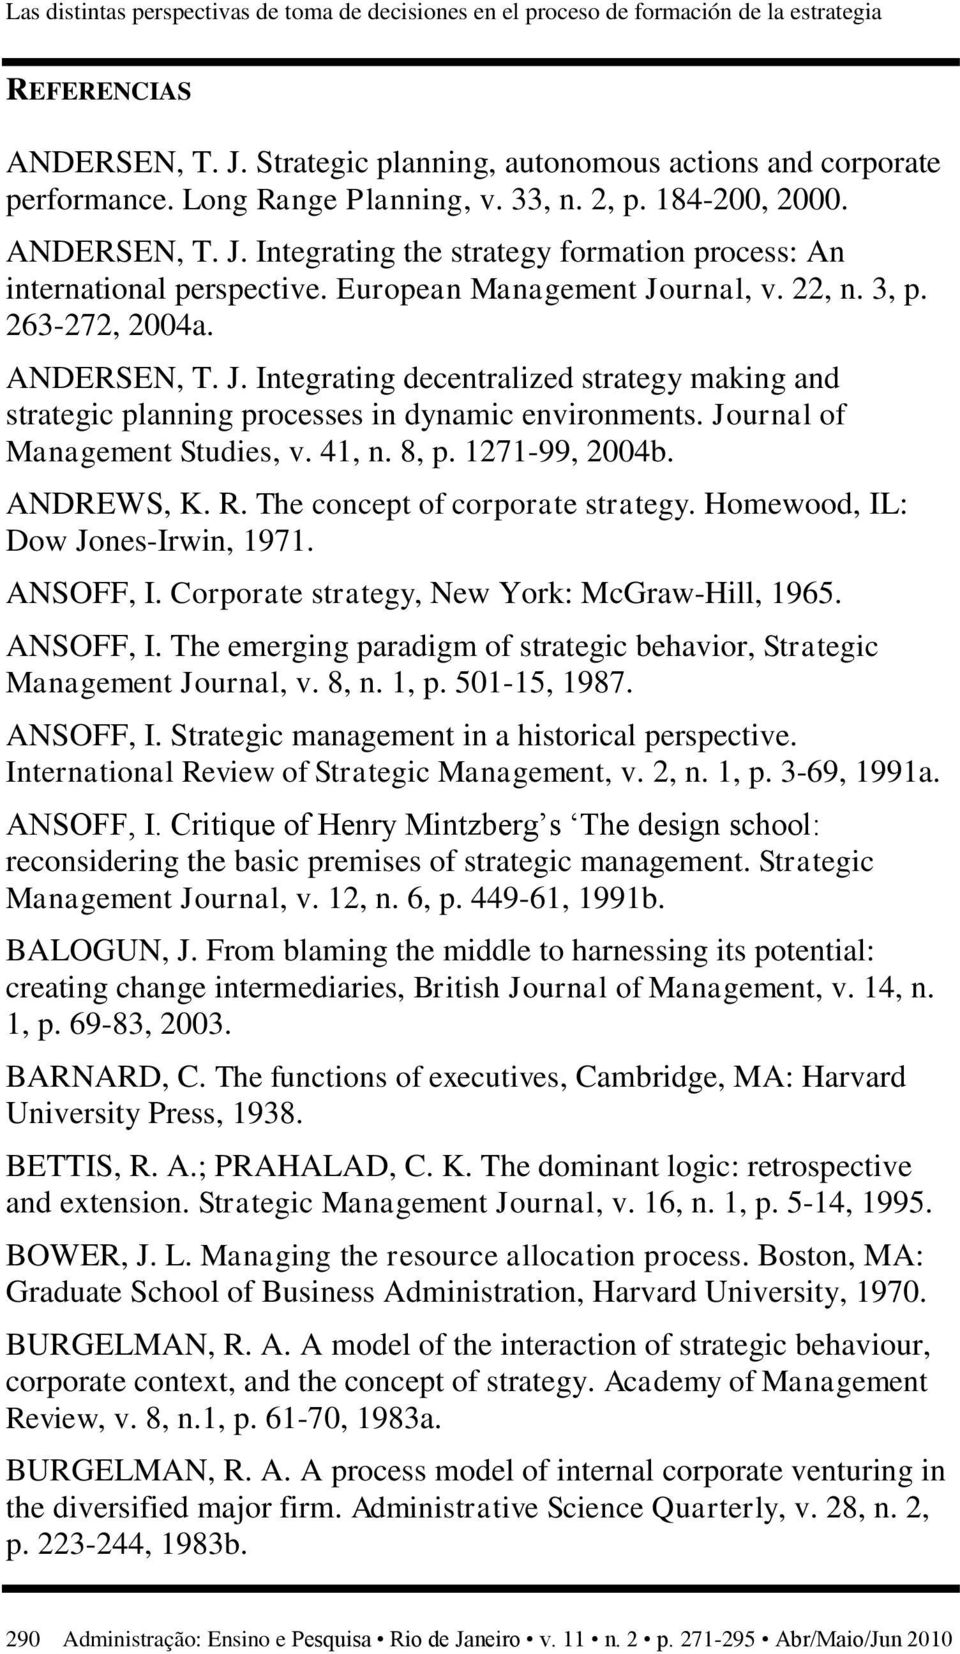 263-272, 2004a. ANDERSEN, T. J. Integrating decentralized strategy making and strategic planning processes in dynamic environments. Journal of Management Studies, v. 41, n. 8, p. 1271-99, 2004b.